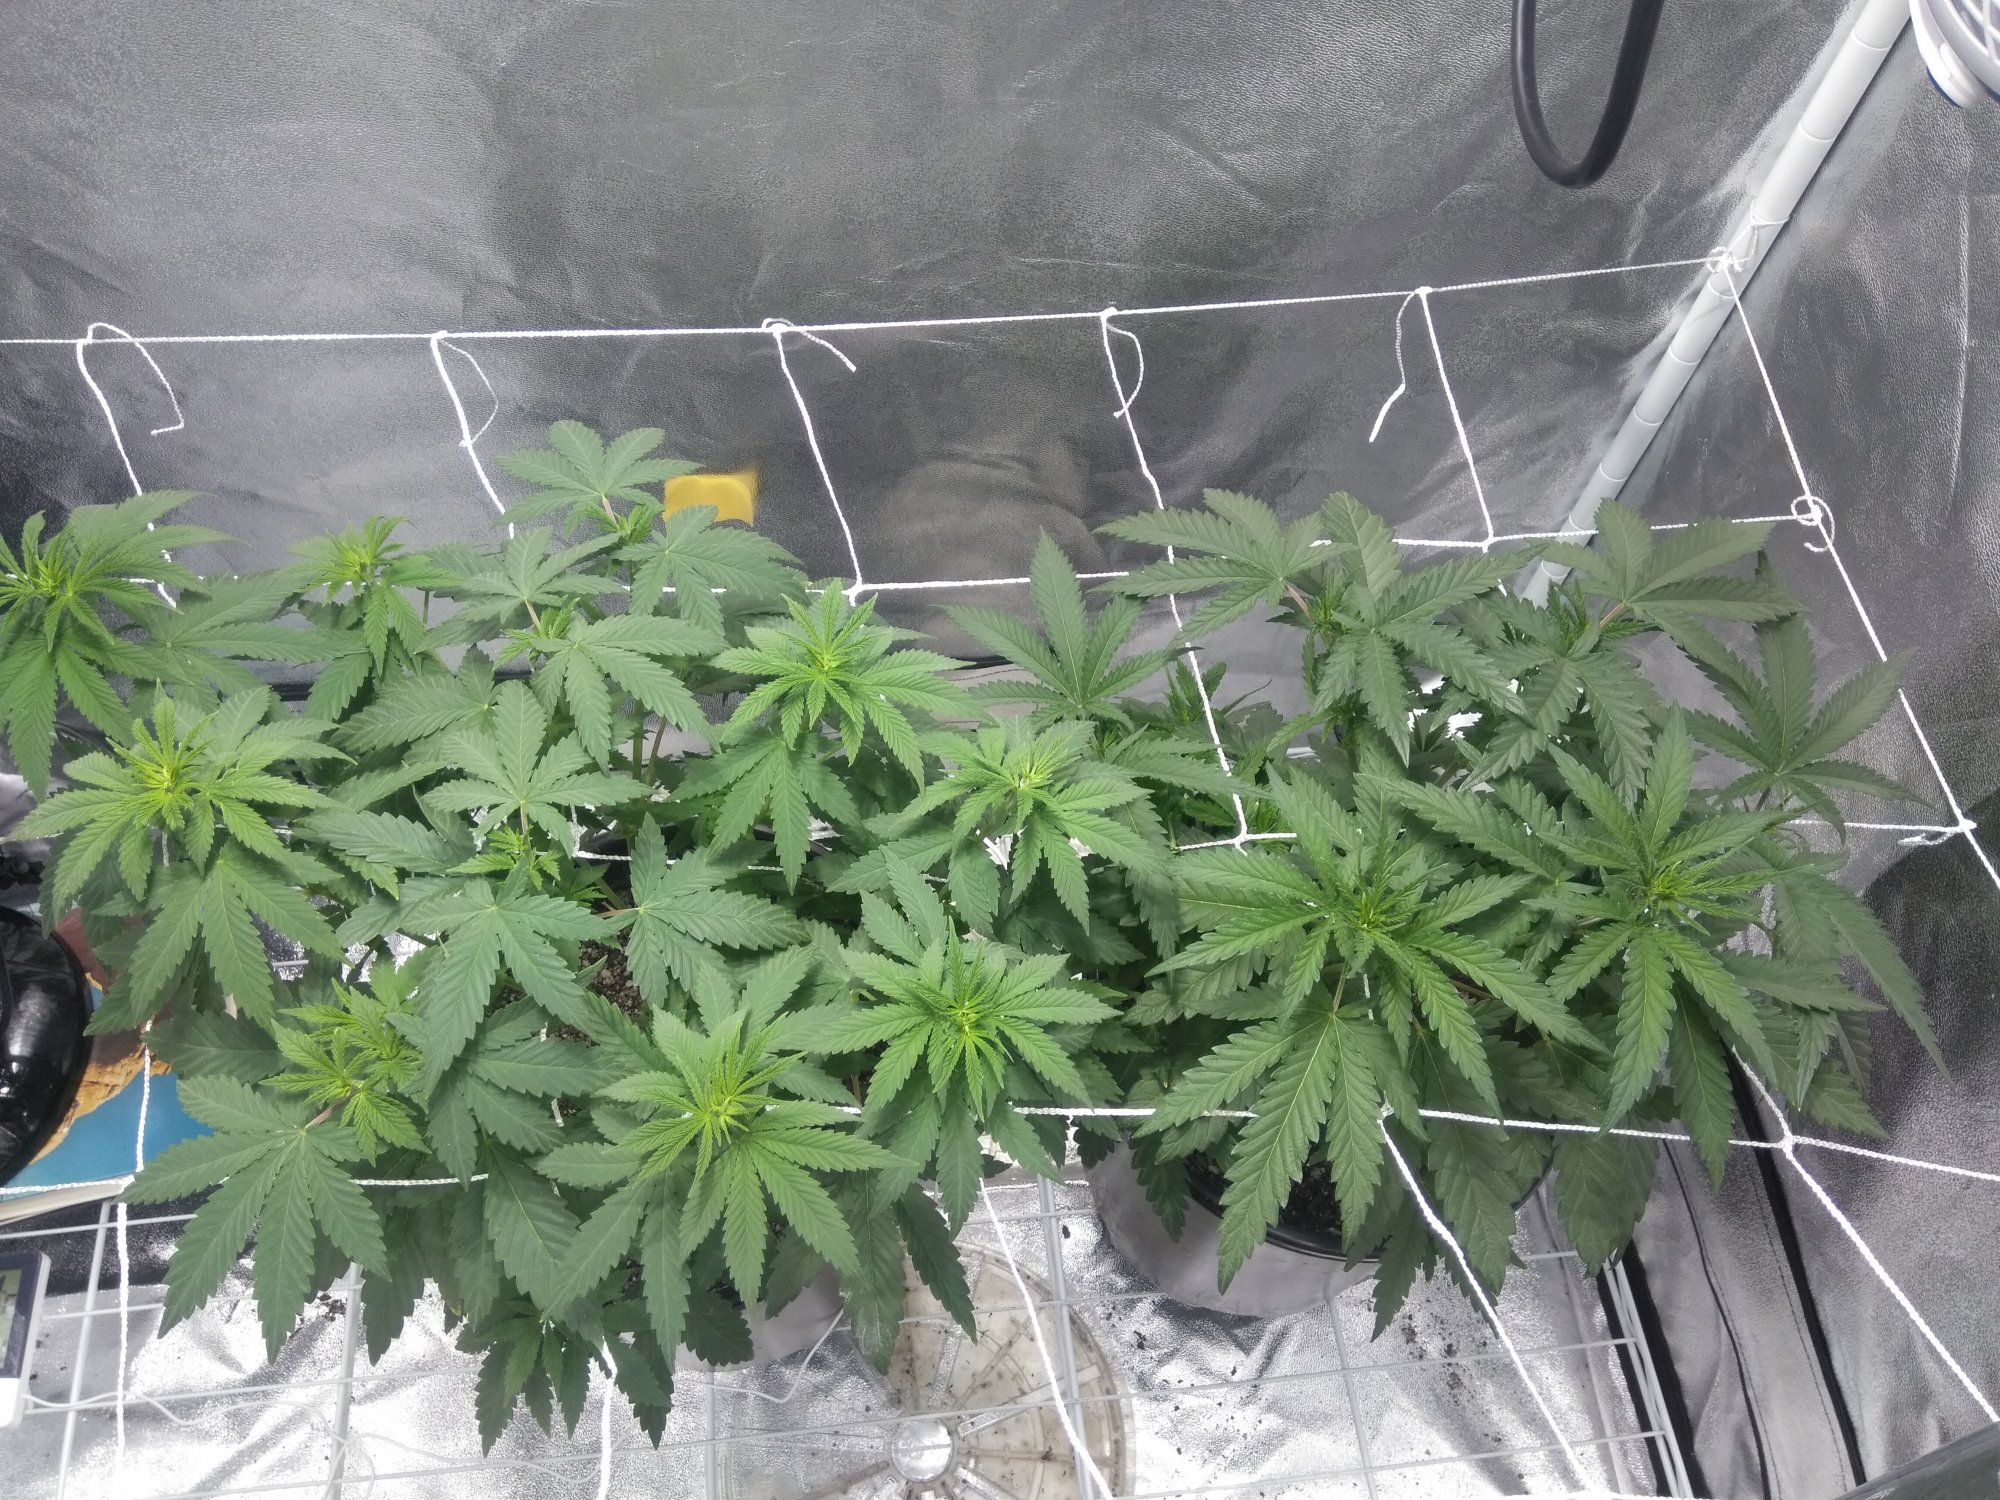 Flipping to flower